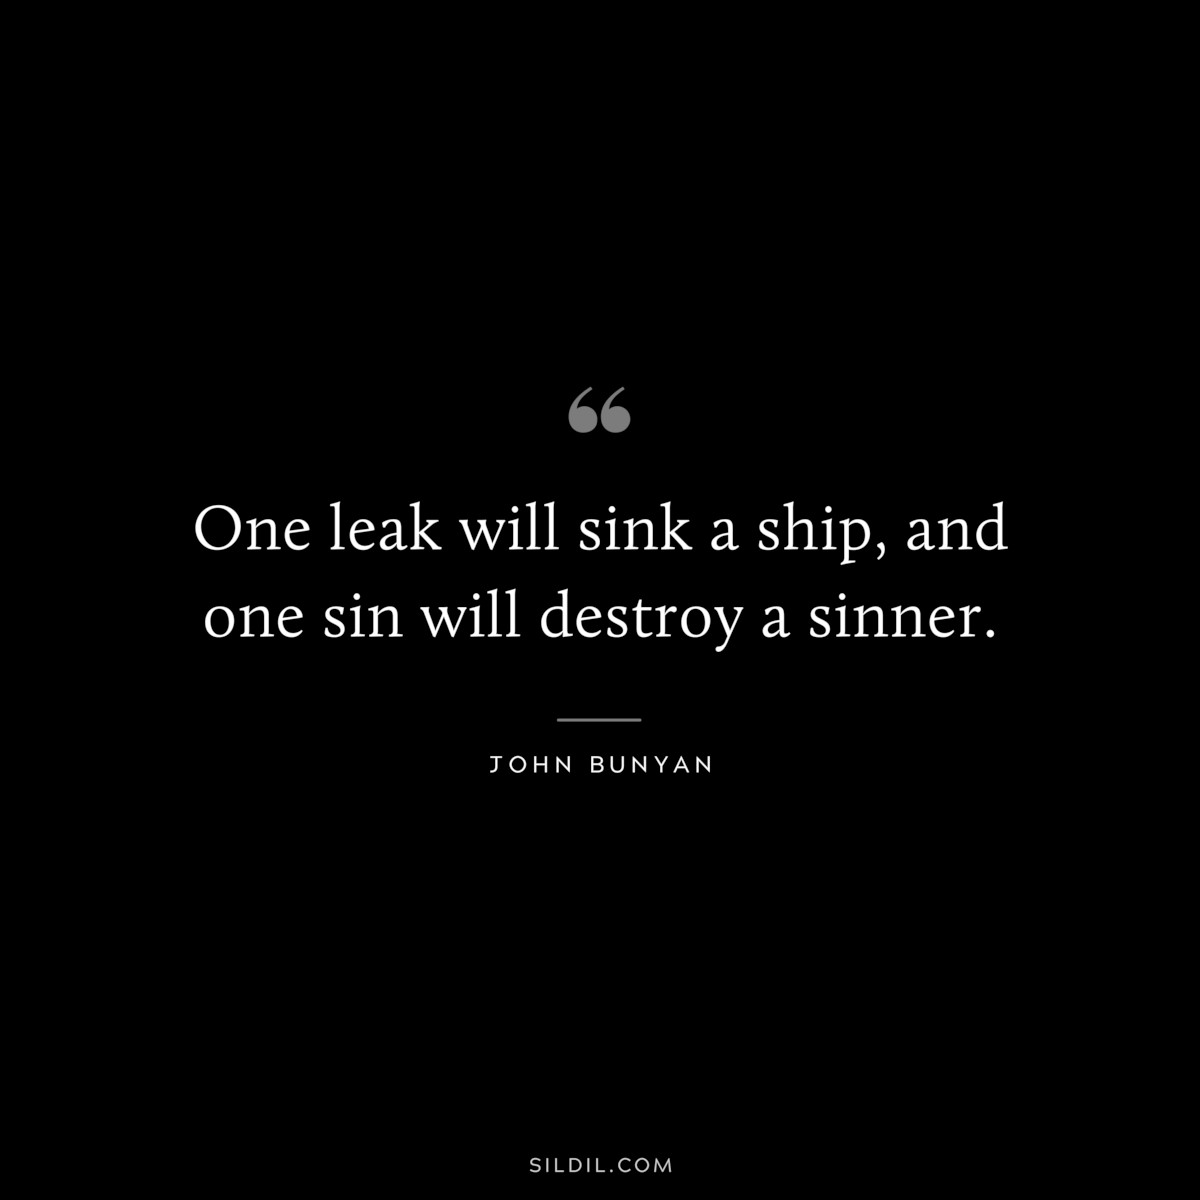 One leak will sink a ship, and one sin will destroy a sinner. ― John Bunyan